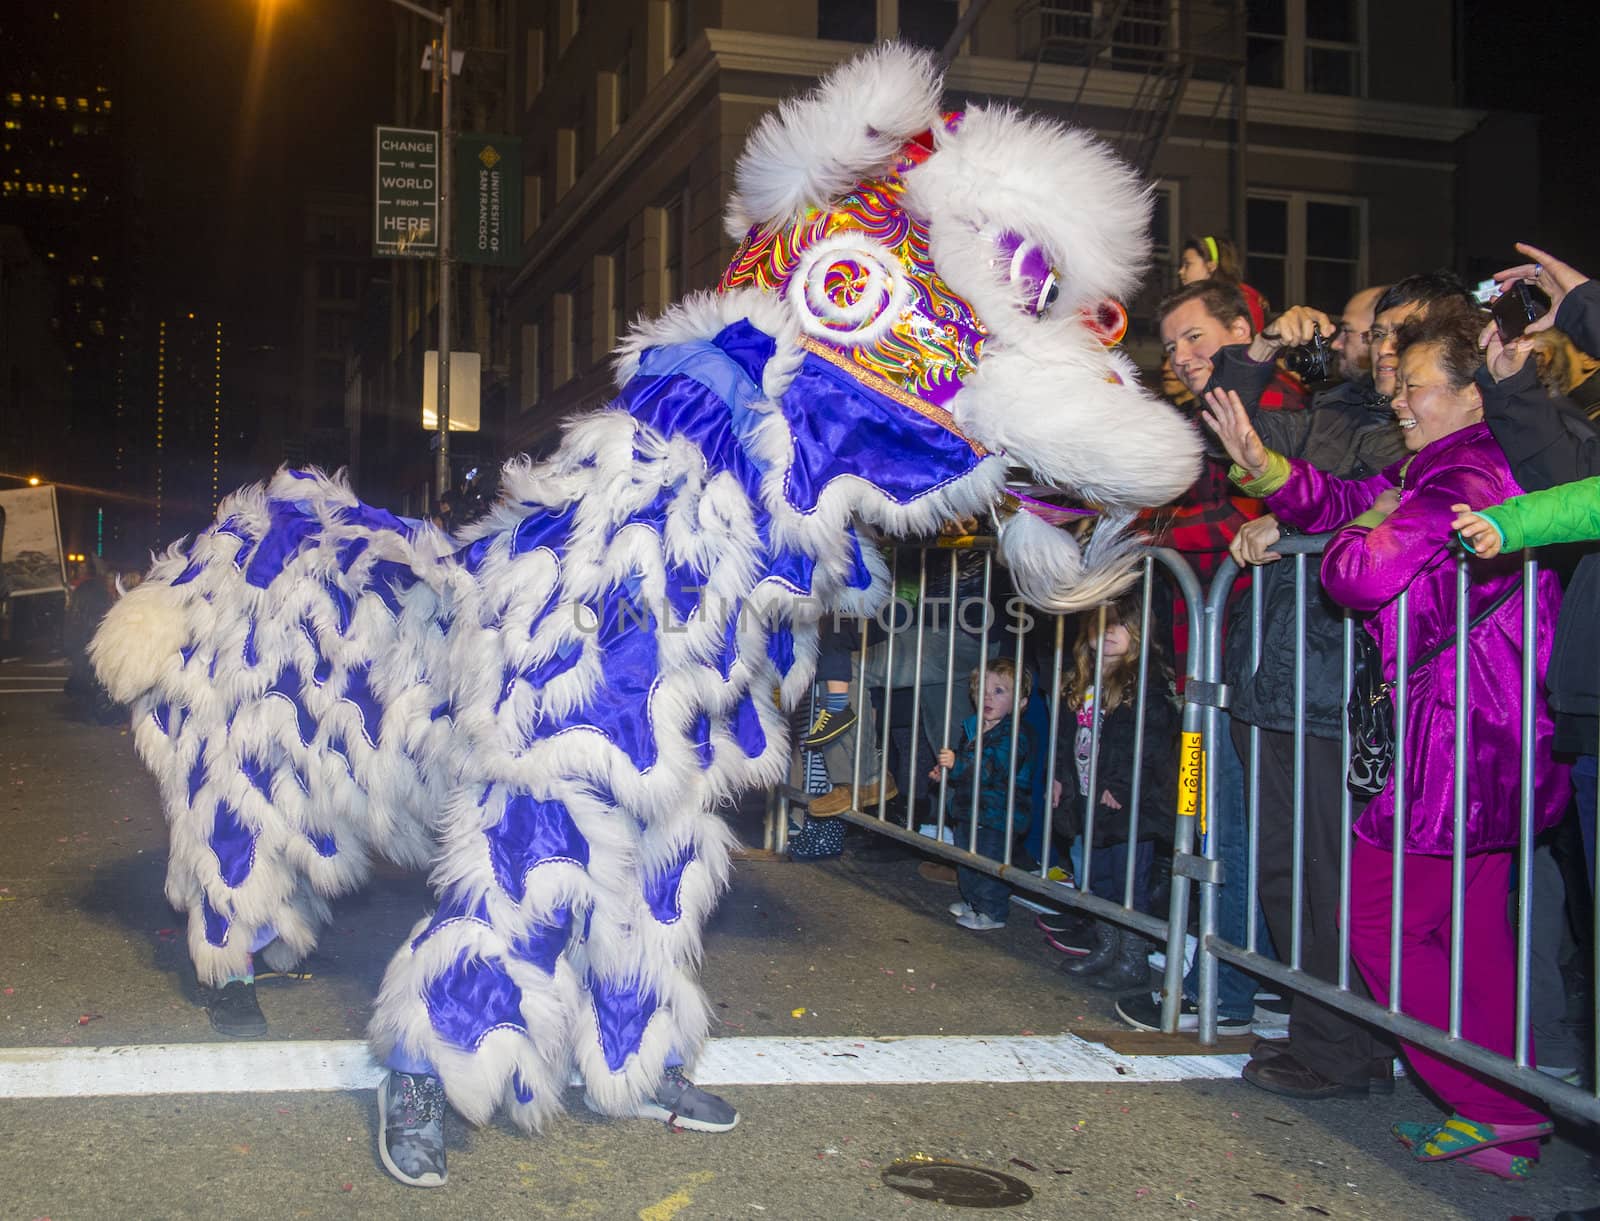 SAN FRANCISCO - FEB 15 : An unidentified participants in a Lion dance at the Chinese New Year Parade in San Francisco , California on February 15 2014 , It is the largest Asian event in North America 